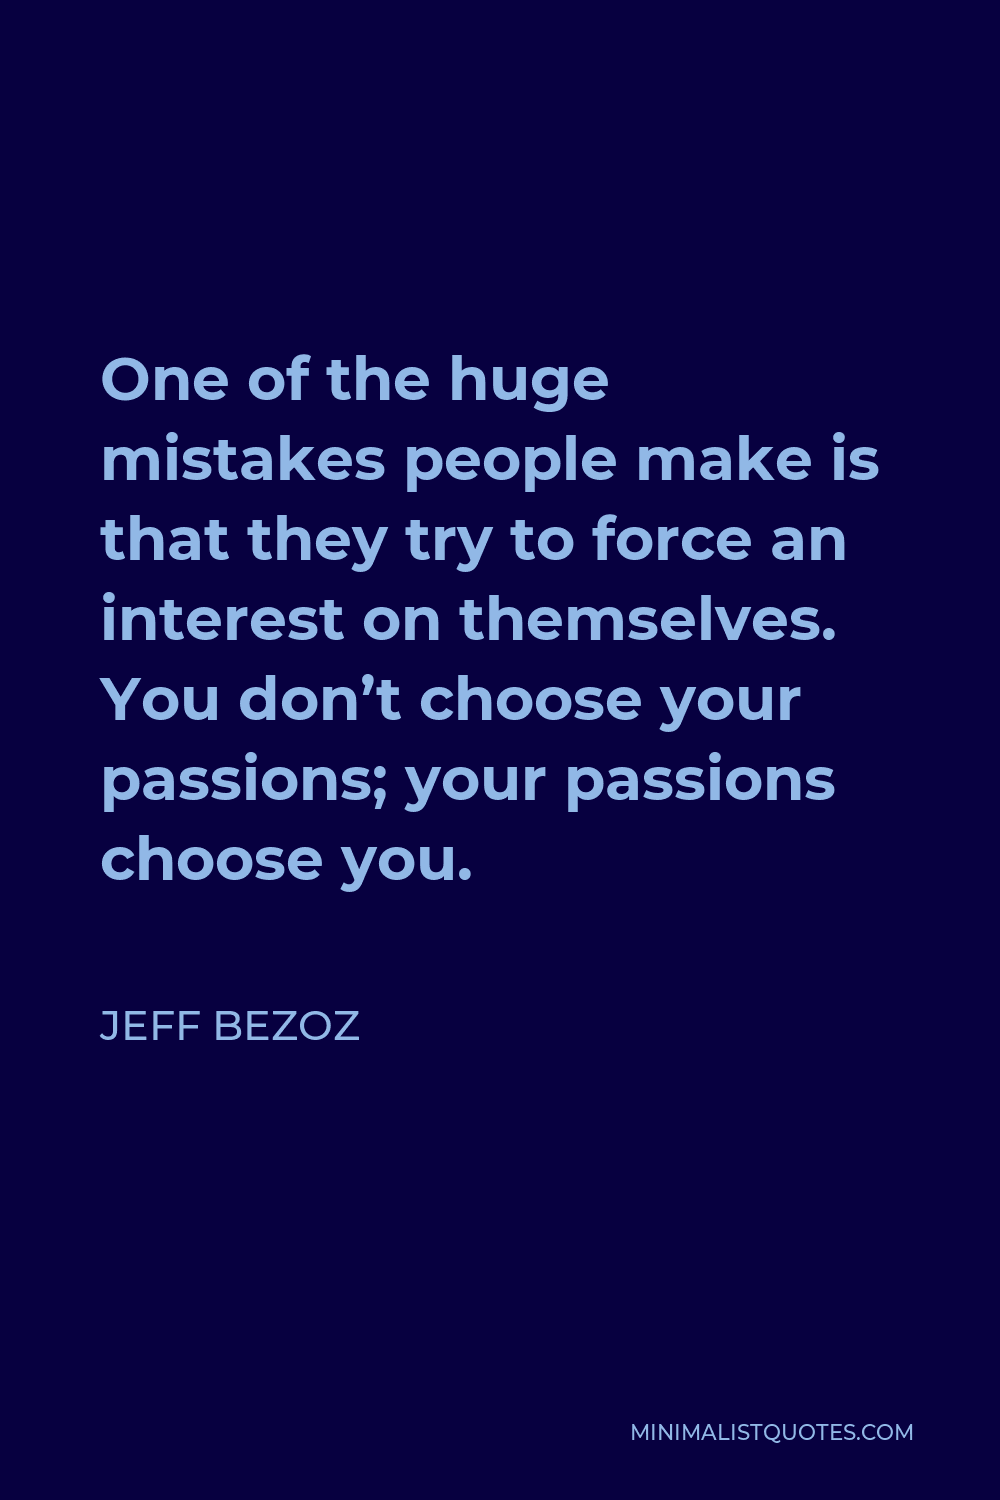 Jeff Bezoz Quote - One of the huge mistakes people make is that they try to force an interest on themselves. You don’t choose your passions; your passions choose you.